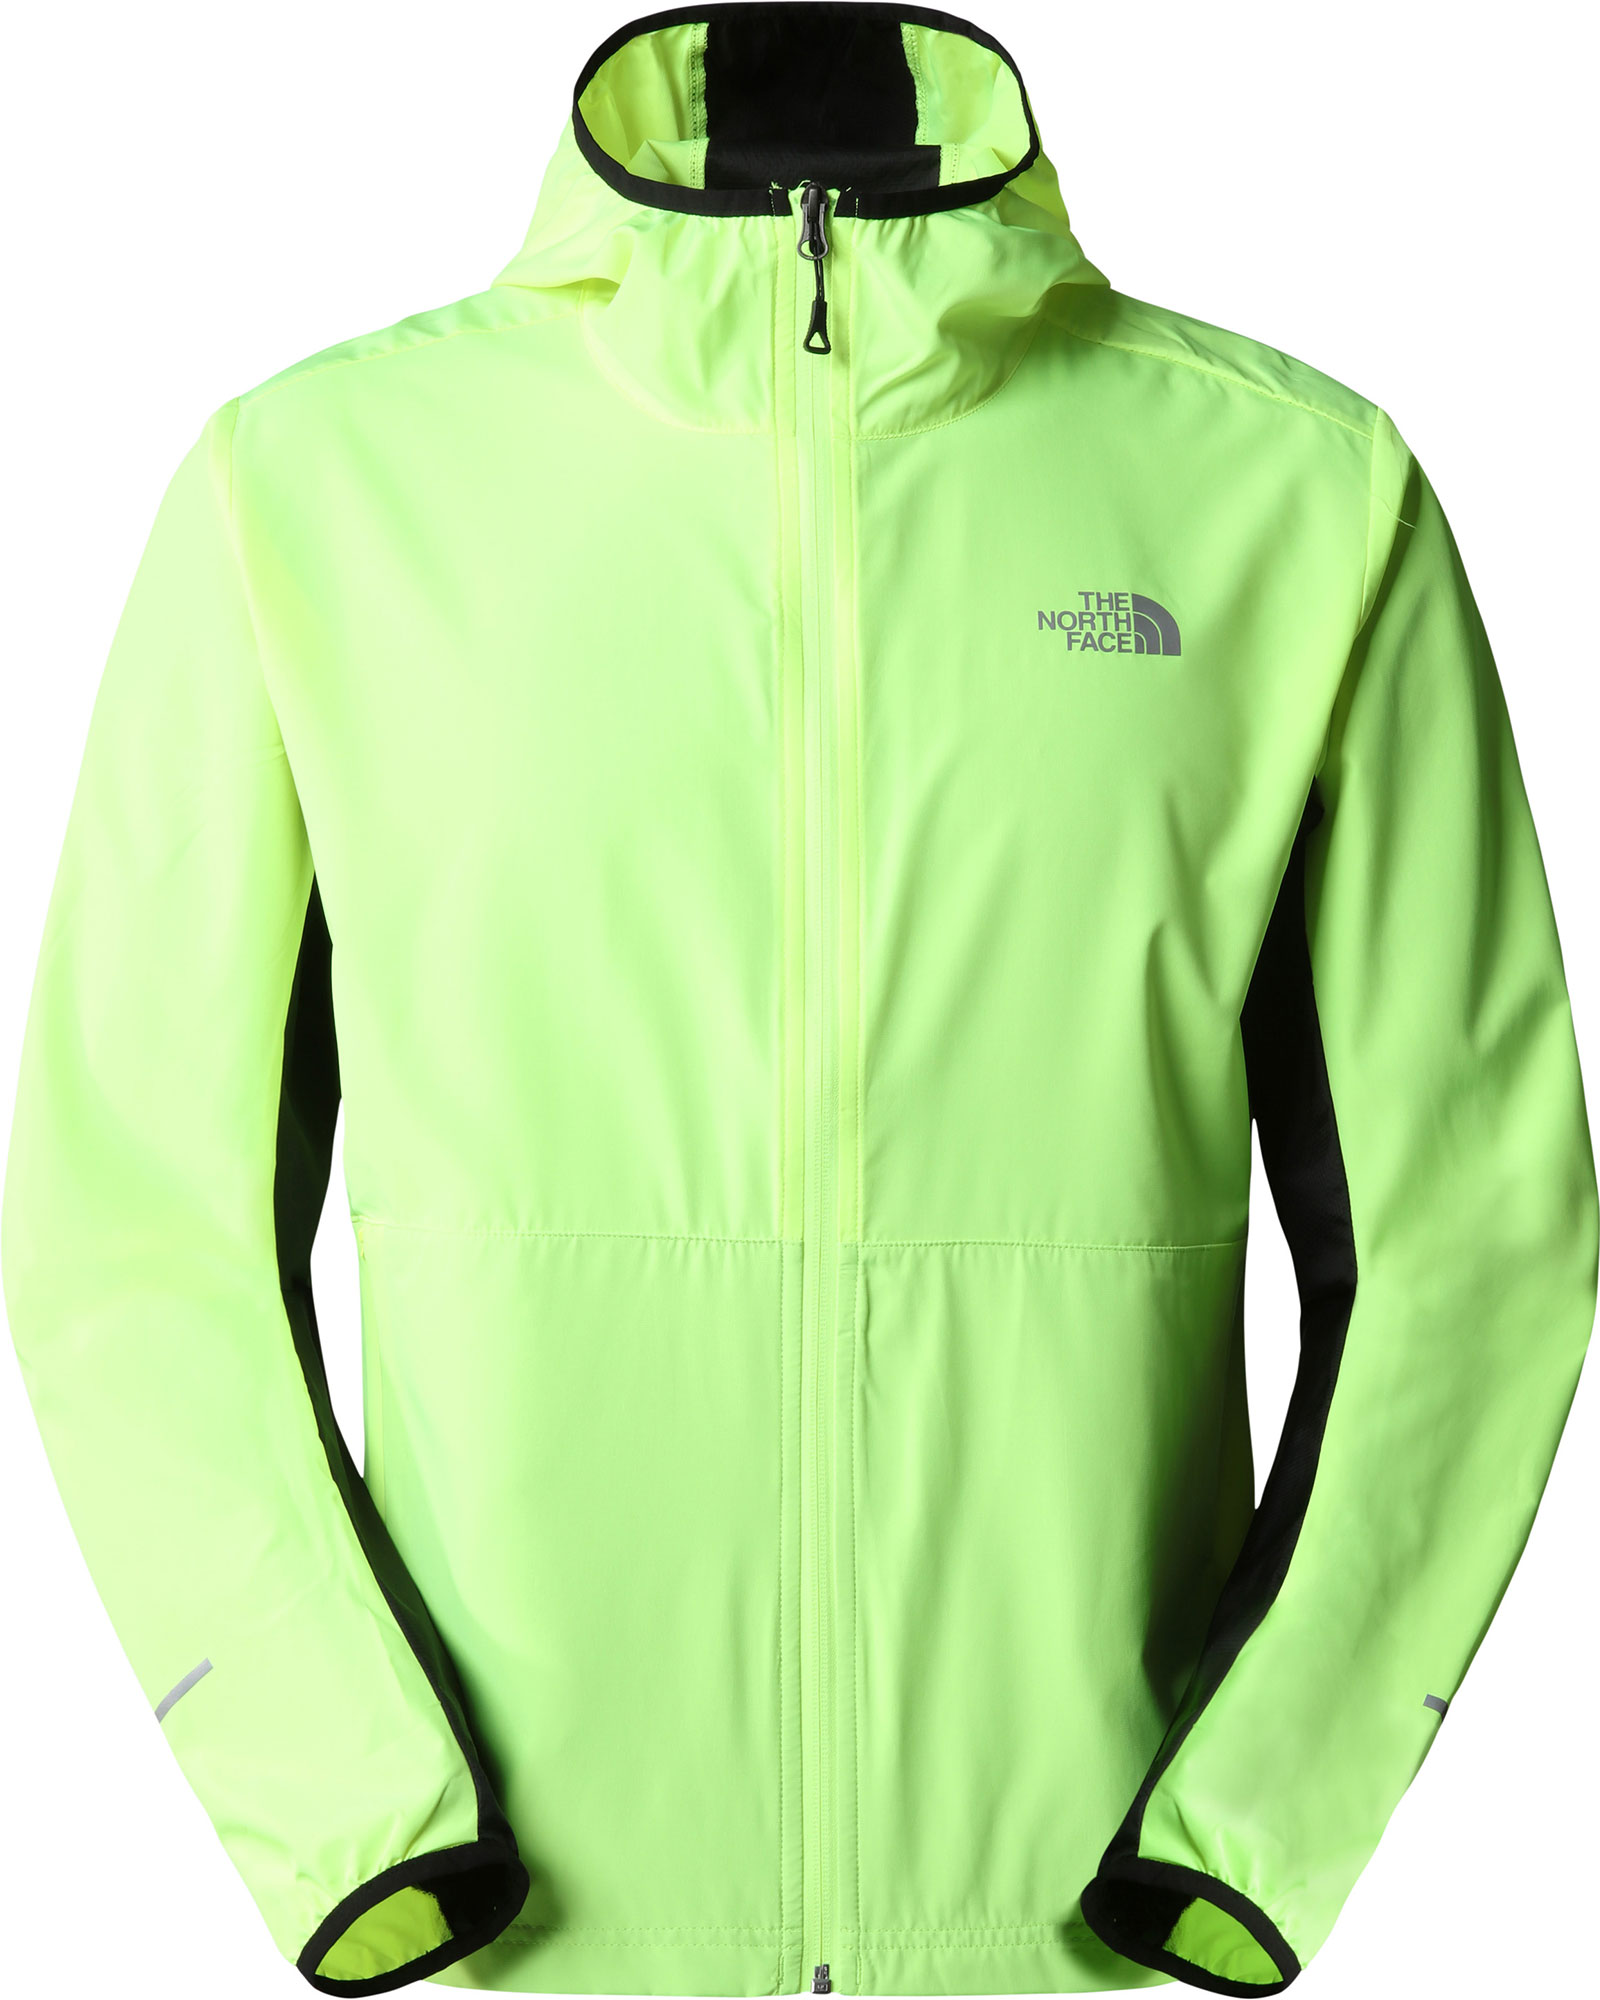 The North Face Men’s Run Wind Jacket - LED Yellow S